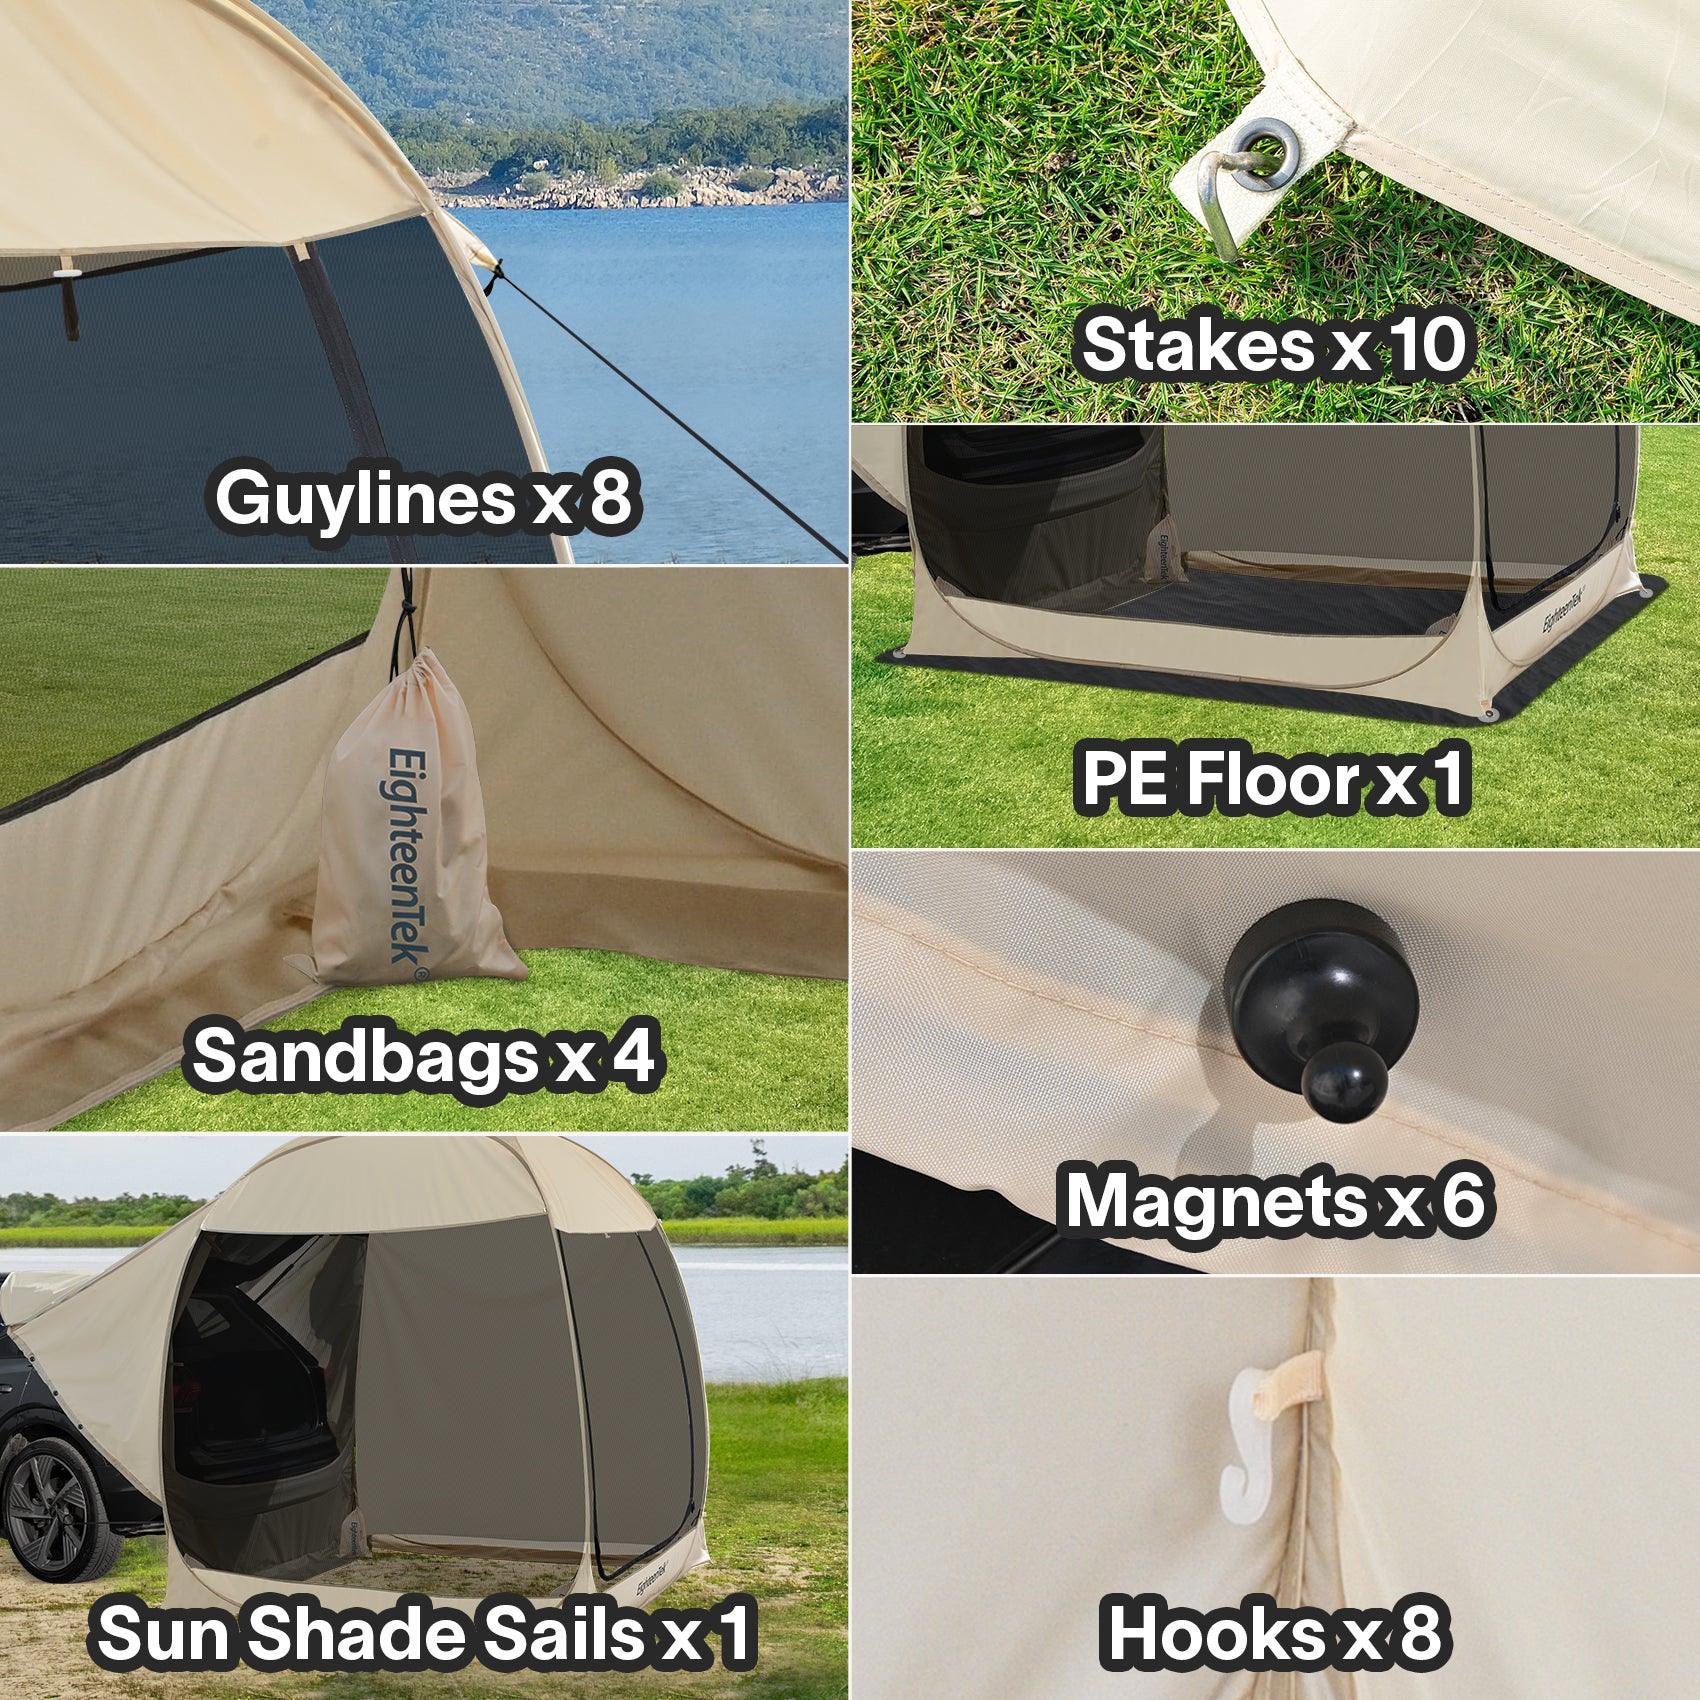 Carrying bags, Guylines, Stakes, PE floor, Magnets, Sandbags, Sun shade sail include in Tent